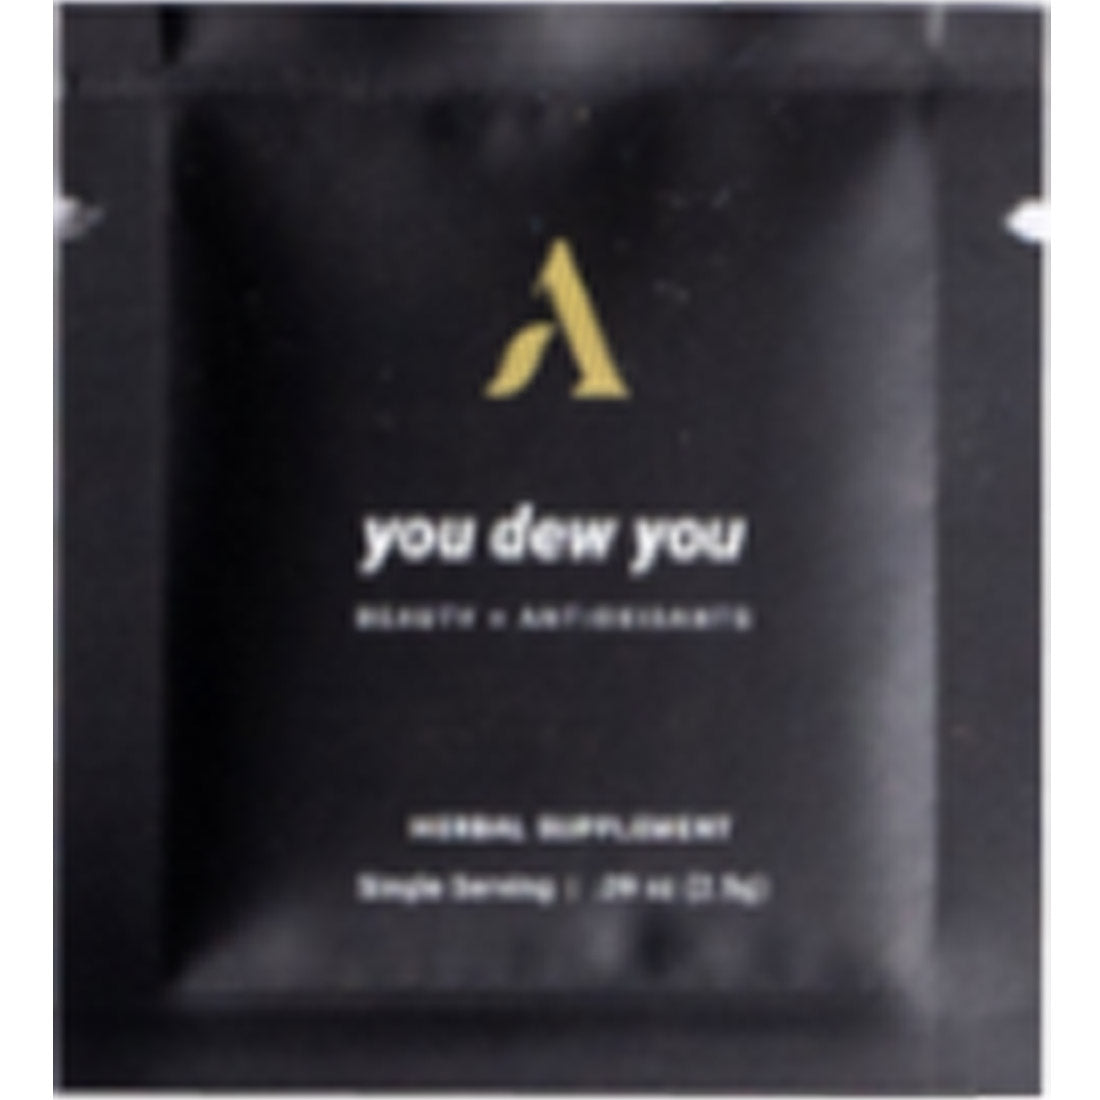 Apothekary You Dew You Beauty and Antioxidant Powder